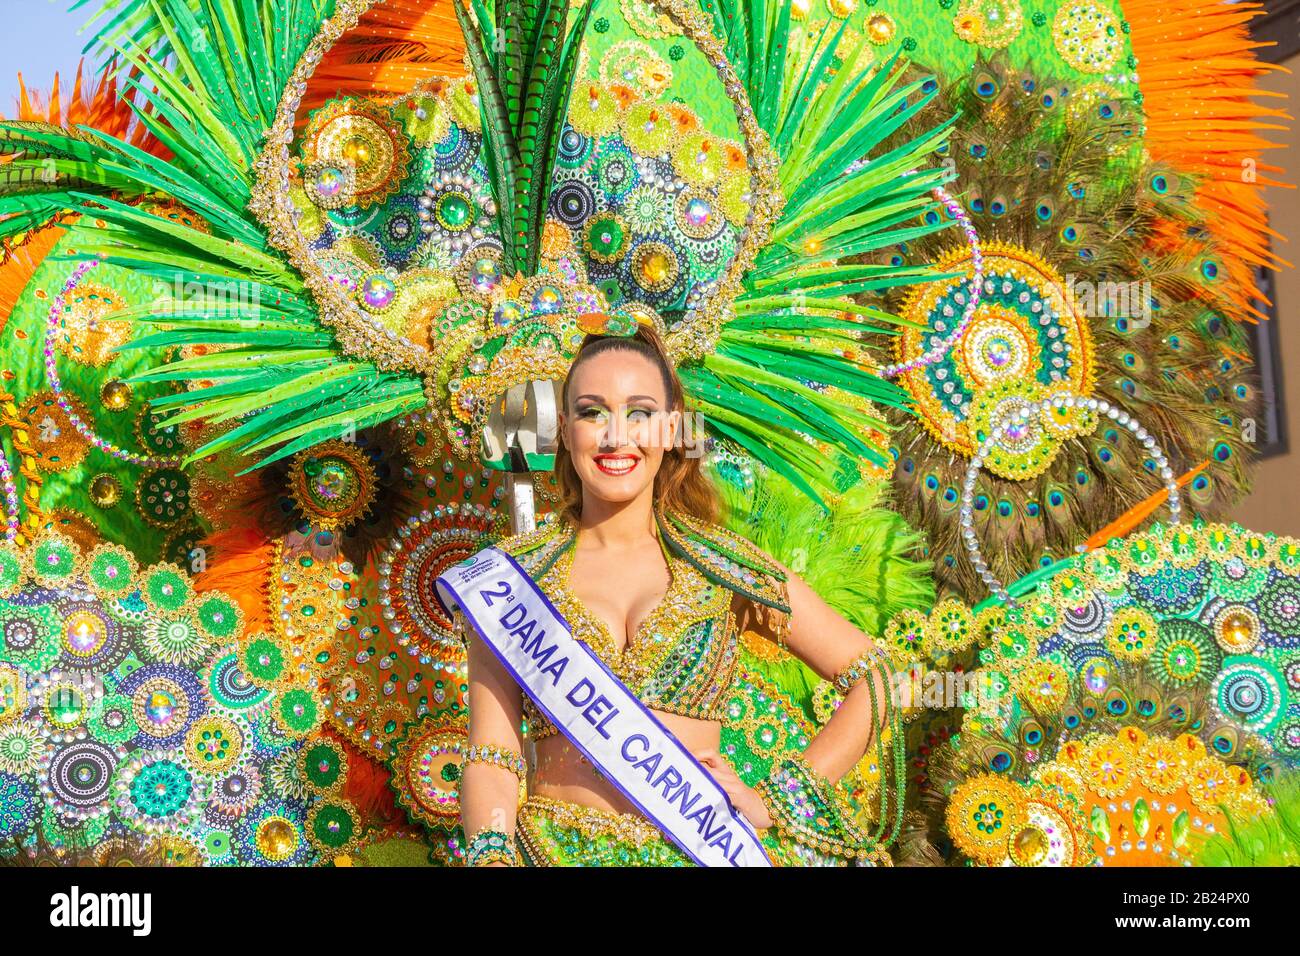 Las Palmas, Gran Canaria, Canary Islands, Spain. 29th February 2020.  Carnival Queen parade as thousands of people in fancy dress take to the  streets at the end of the month long carnival